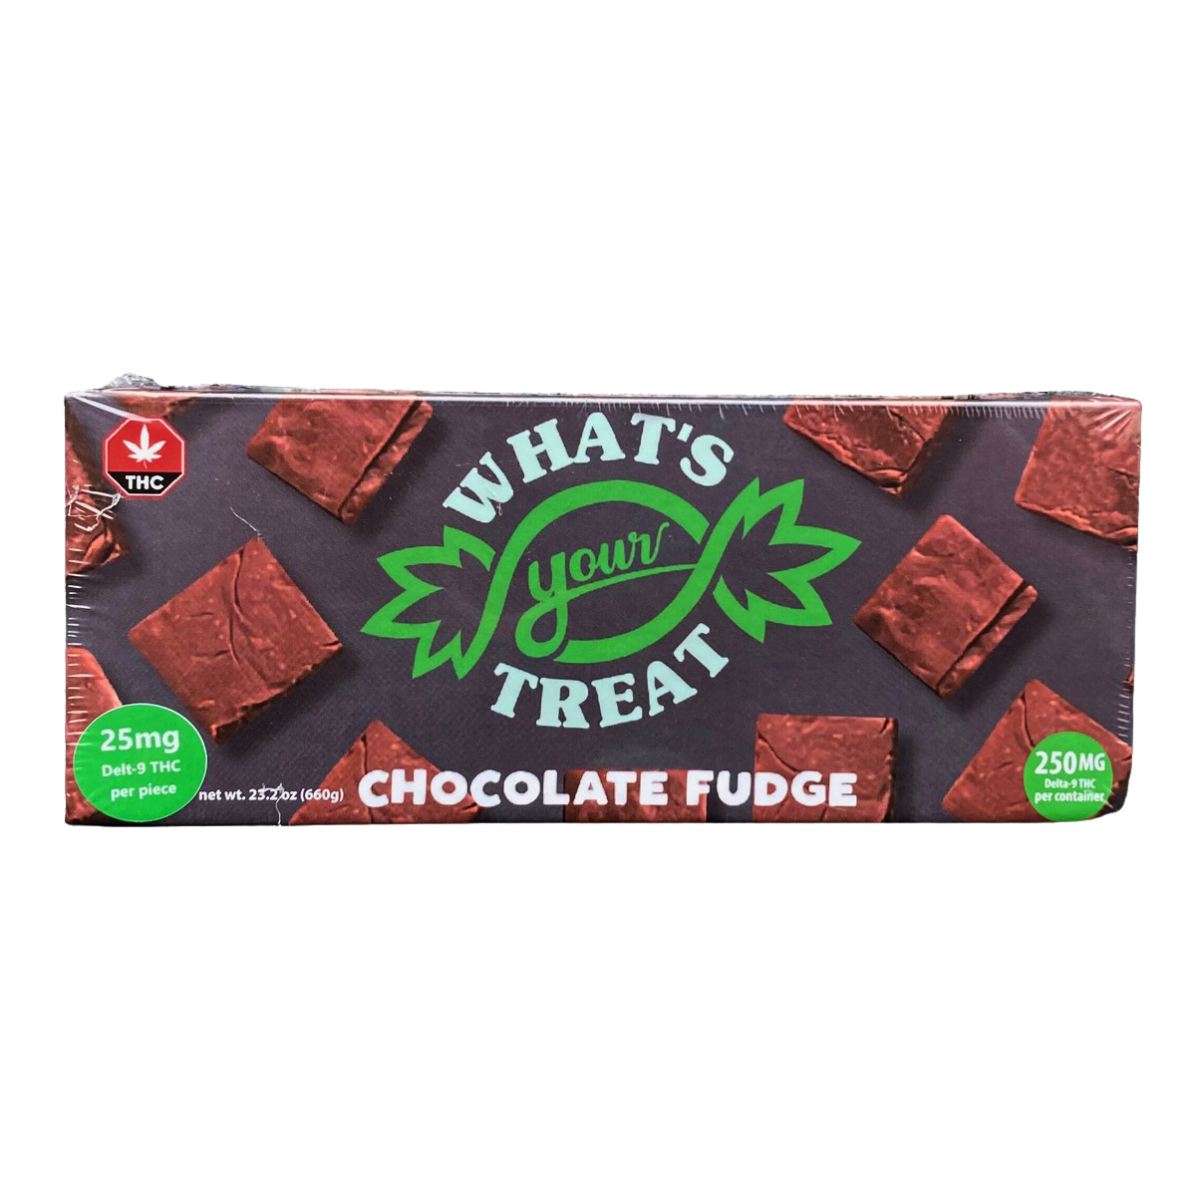 D9 Chocolate Fudge - 250mg - 10pc - What's Your Treat? | Apotheca.org delivers THC, Free!*